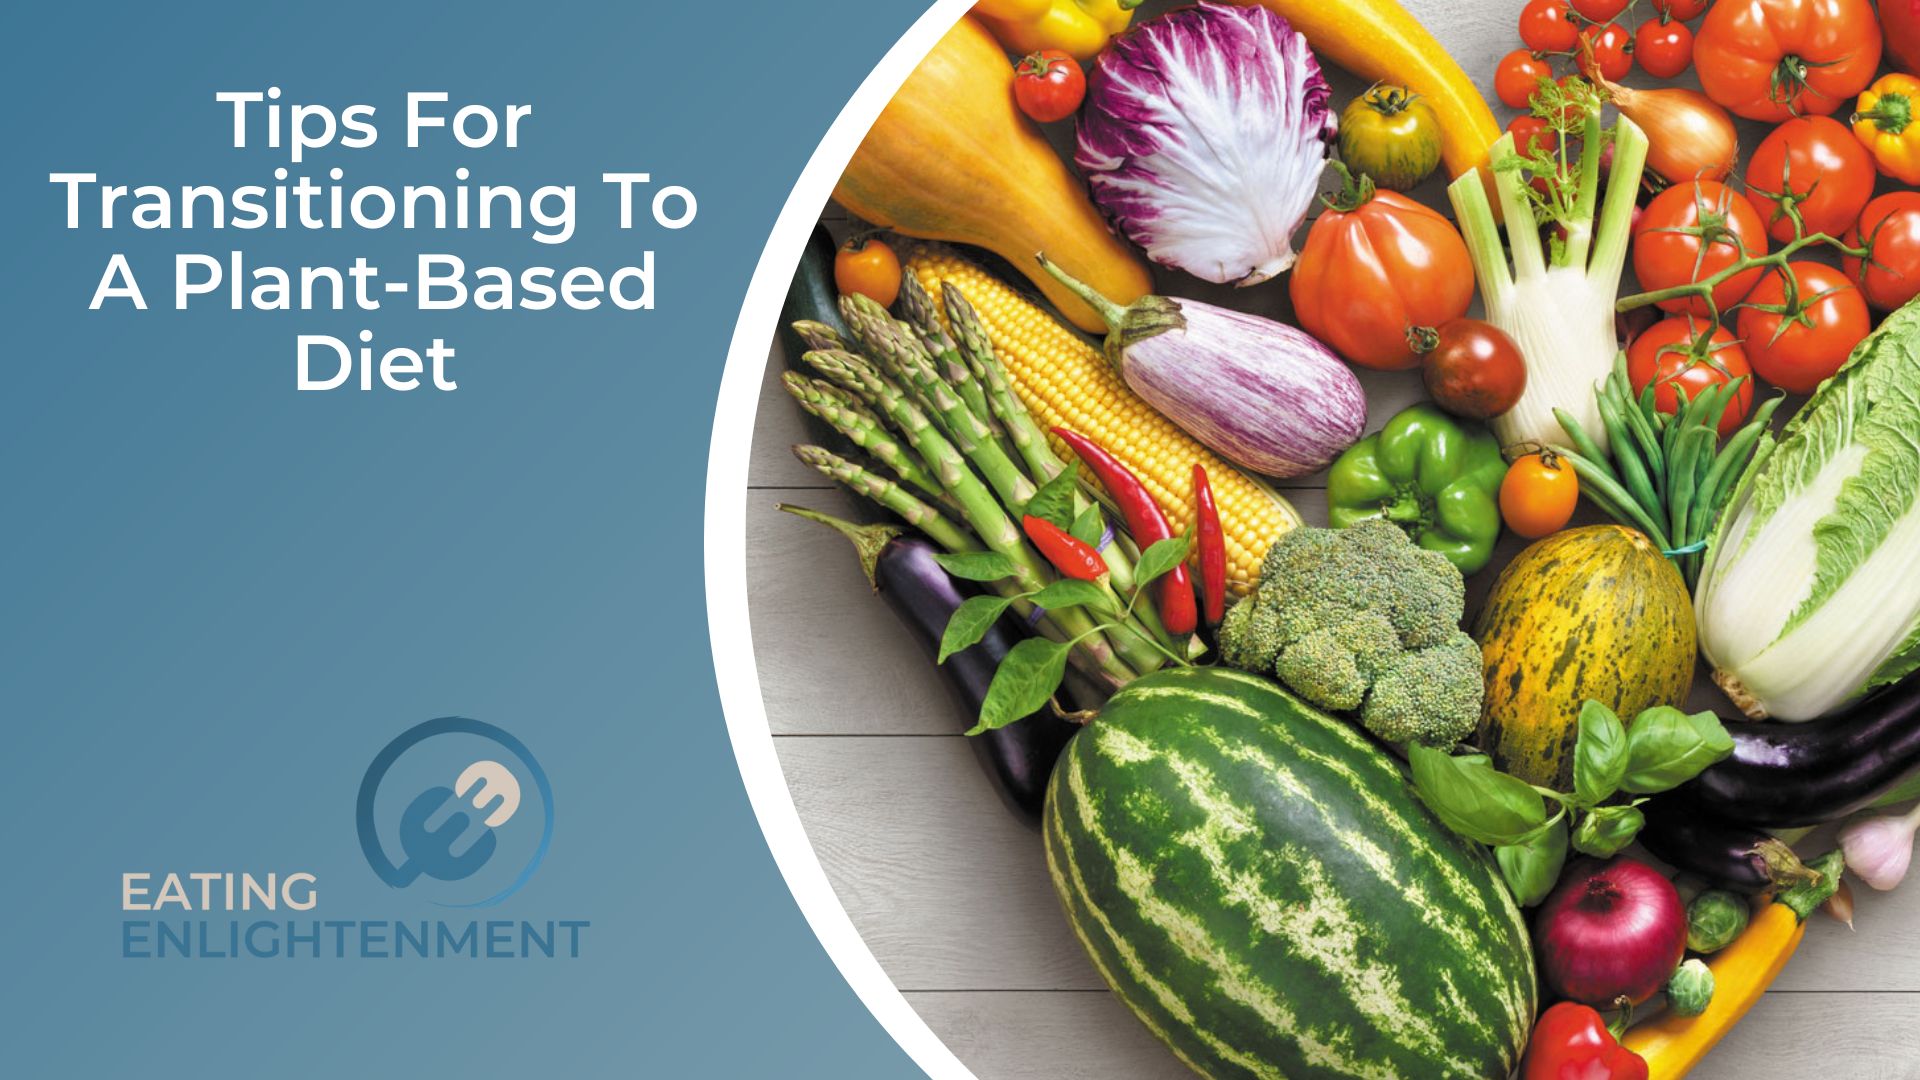 Tips For Transitioning To A Plant-Based Diet